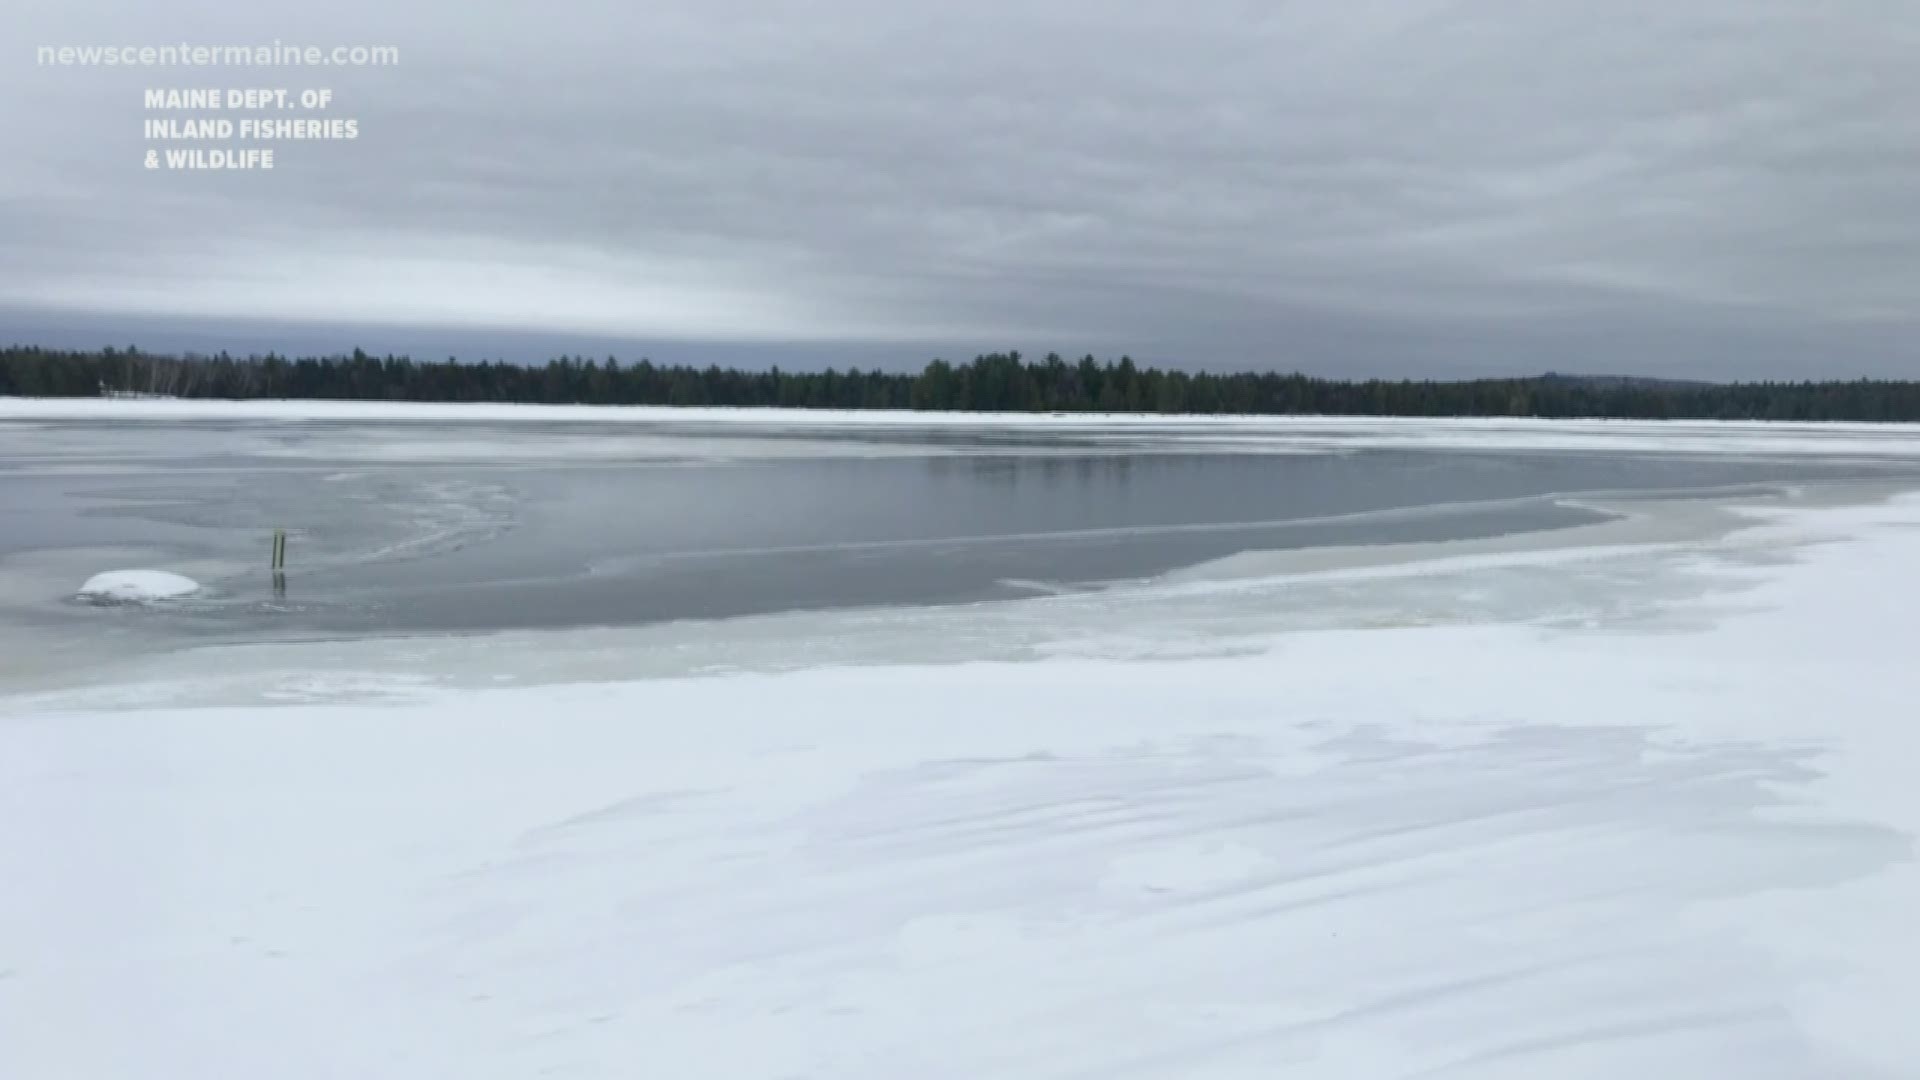 The Maine Department of Inland Fisheries and Wildlife says a father and daughter barely survived after falling throught the ice while snowmobiling.